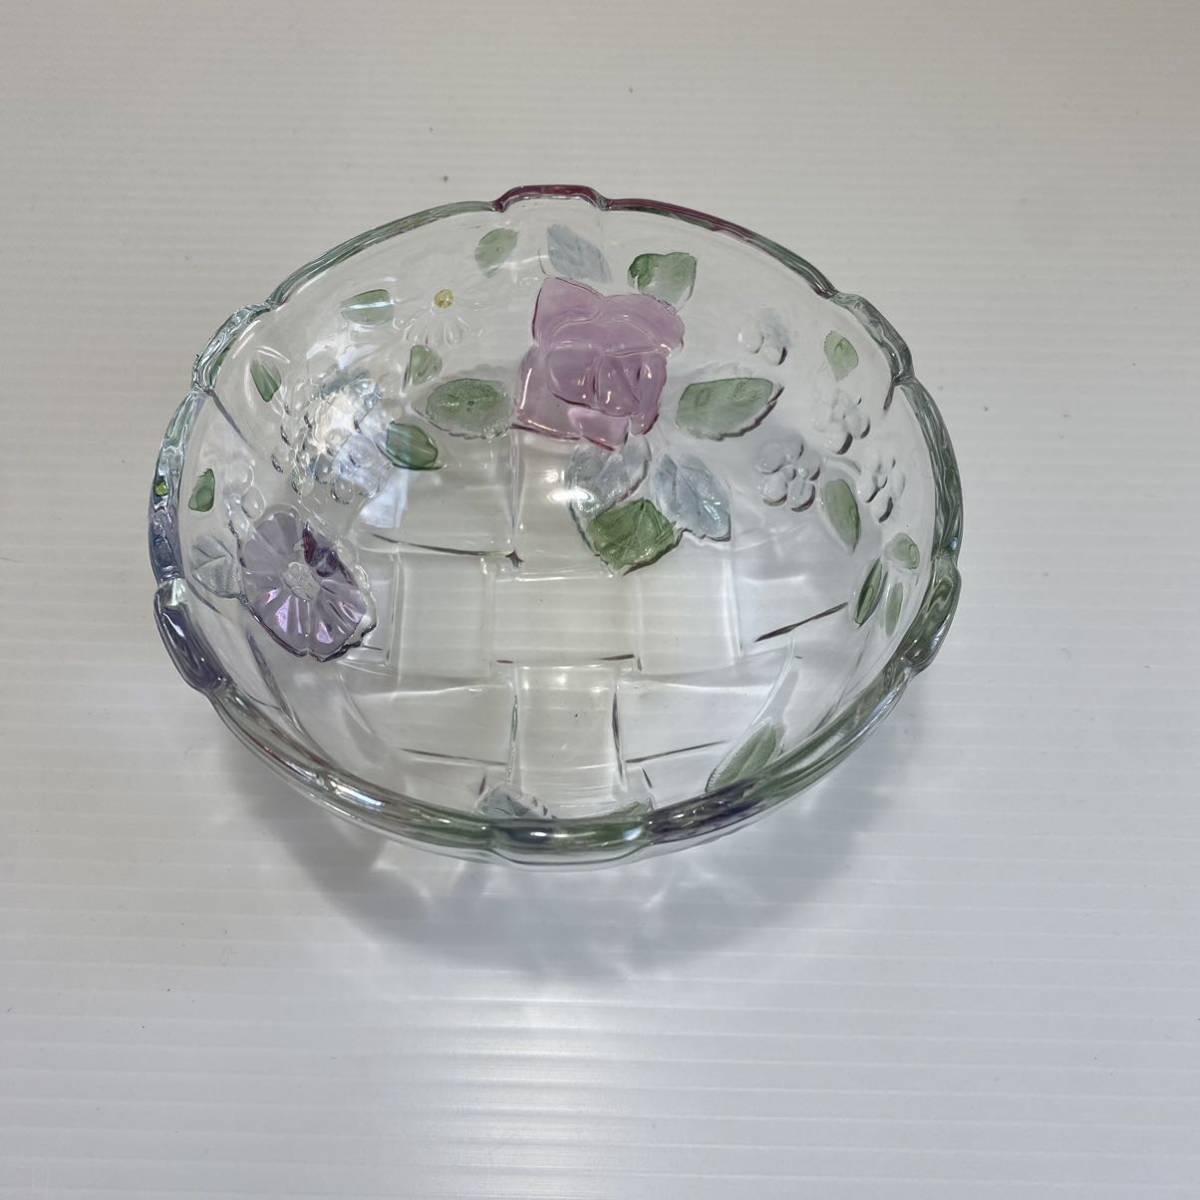 contemporary glass collection ガラス ボウル レトロ 花 薔薇 デザート皿 食器 5個セットの画像2